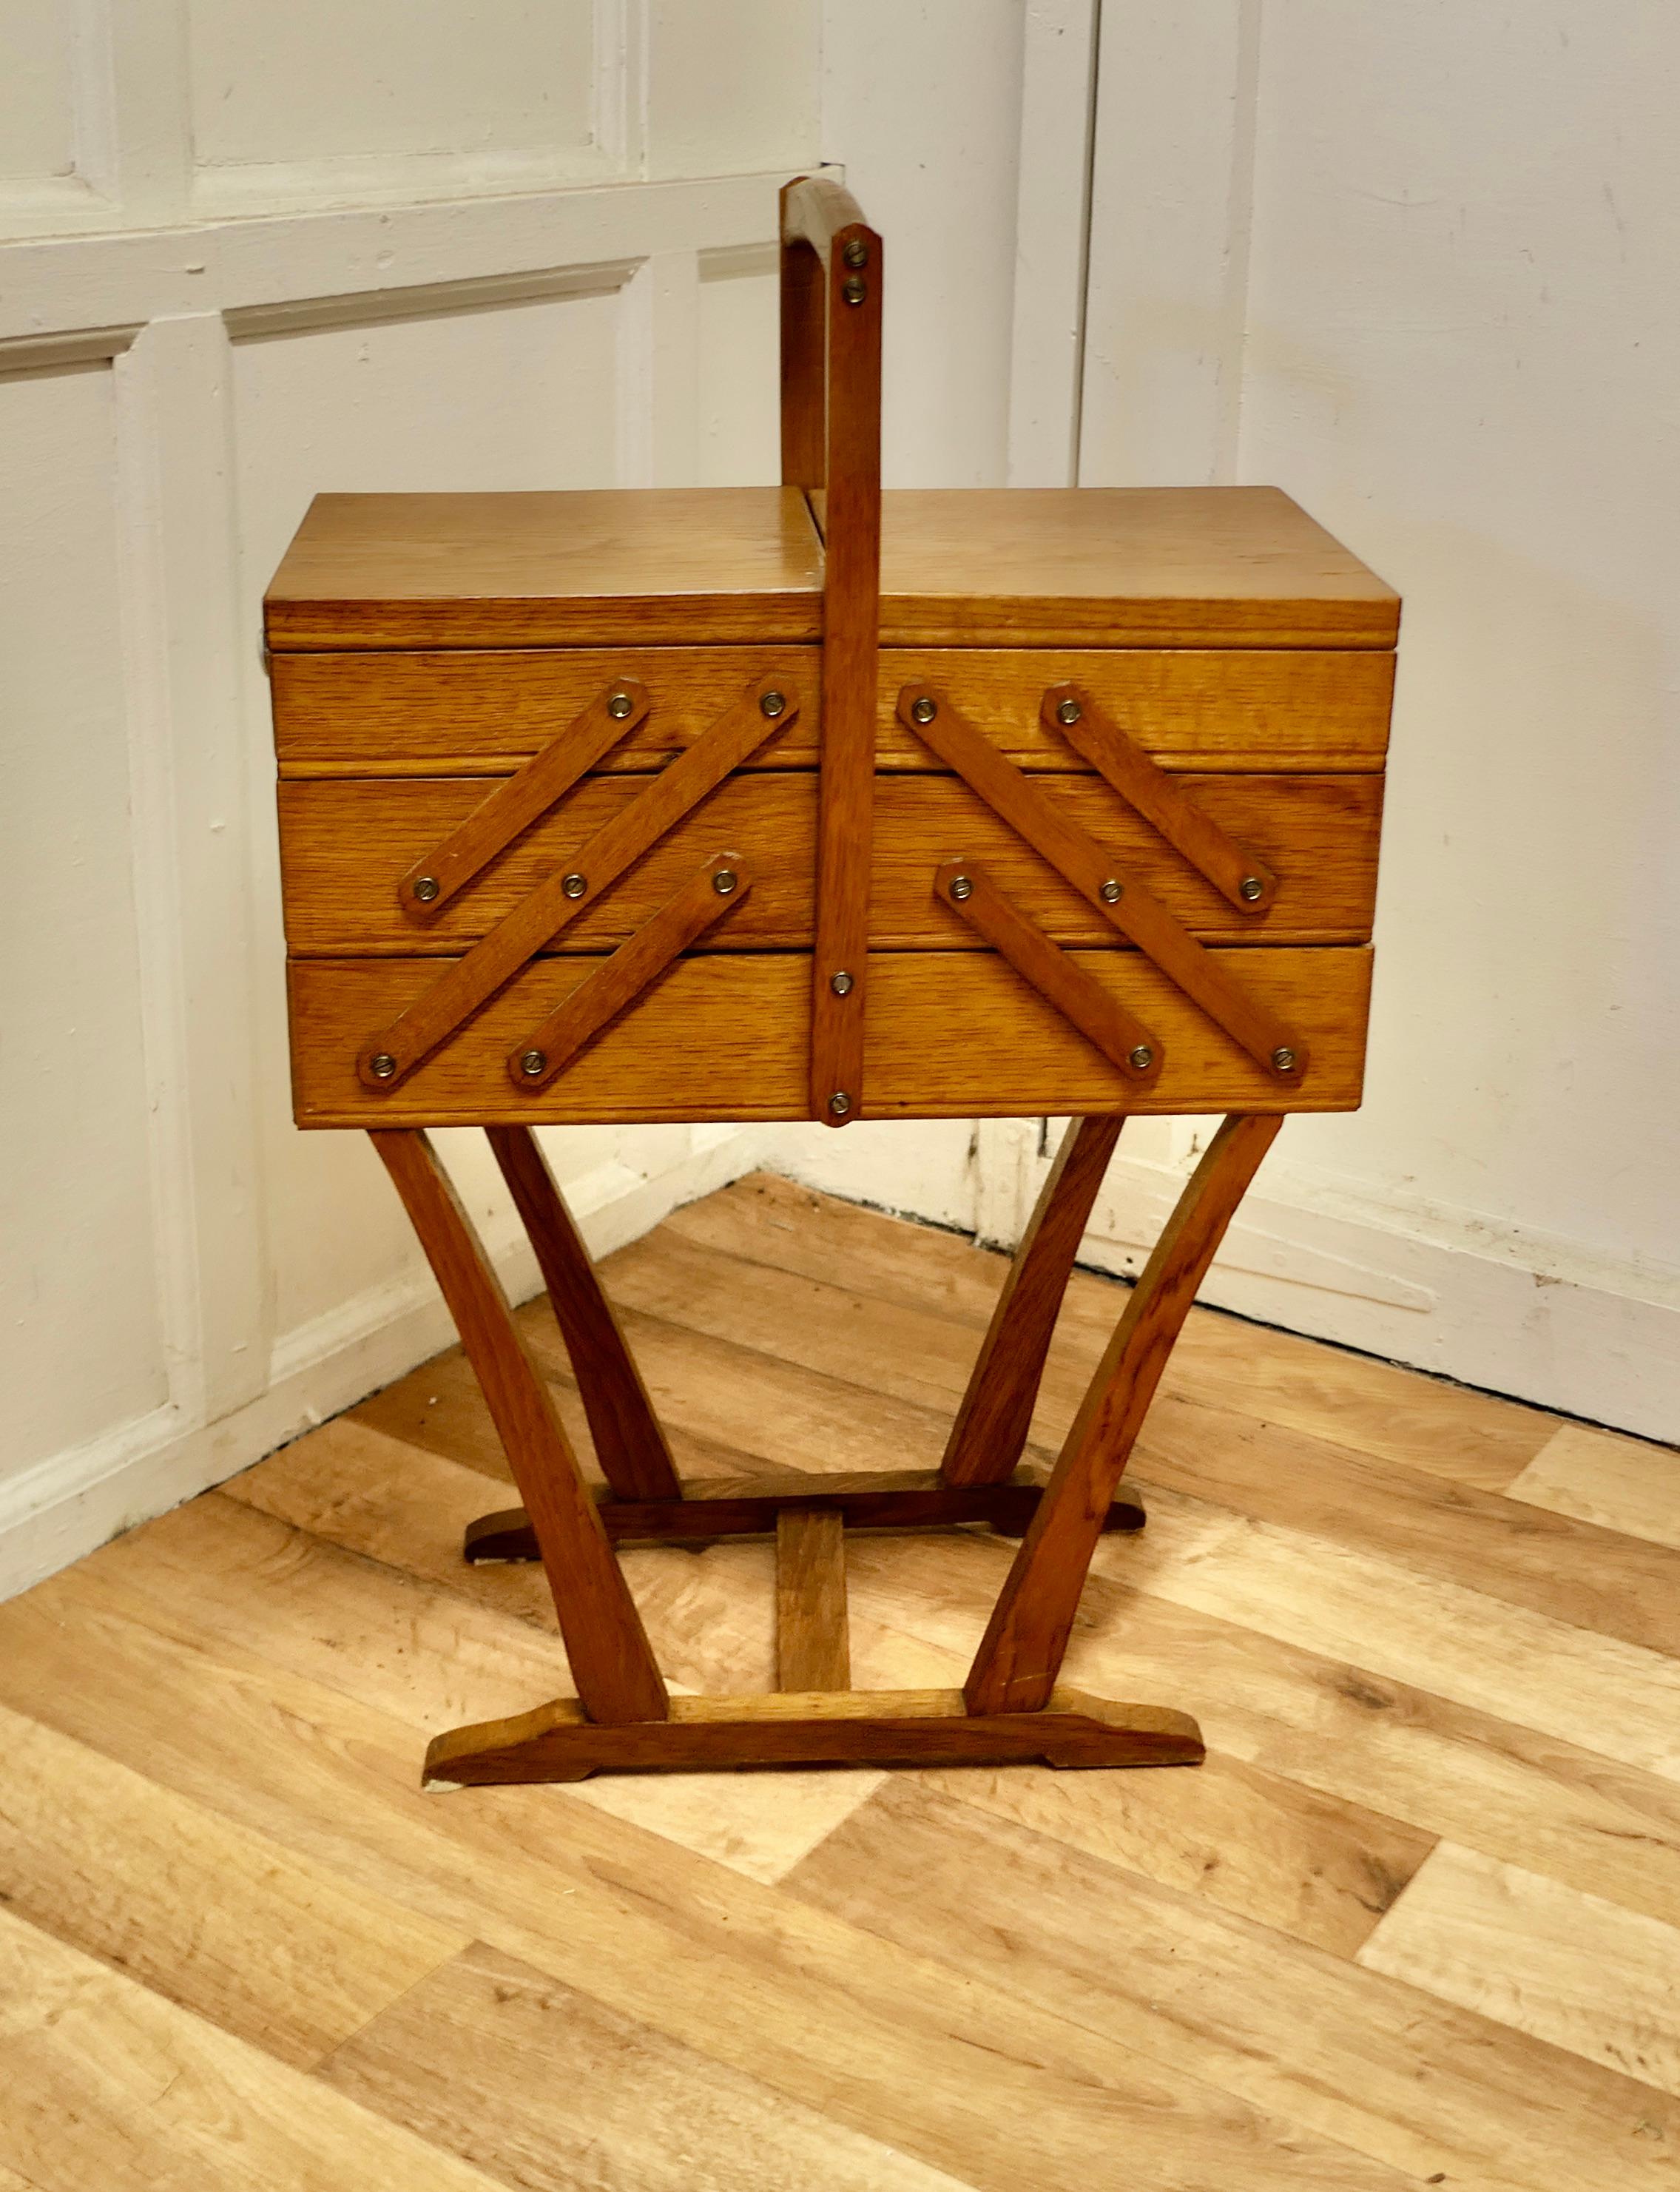 French Art Deco Metamorphic Concertina Sewing or Work Box 

Made in Golden Oak and very stylish 
So much storage in such a small space, this great little piece opens out to 4 times its size and then closes back up to a neat floor-standing carrying